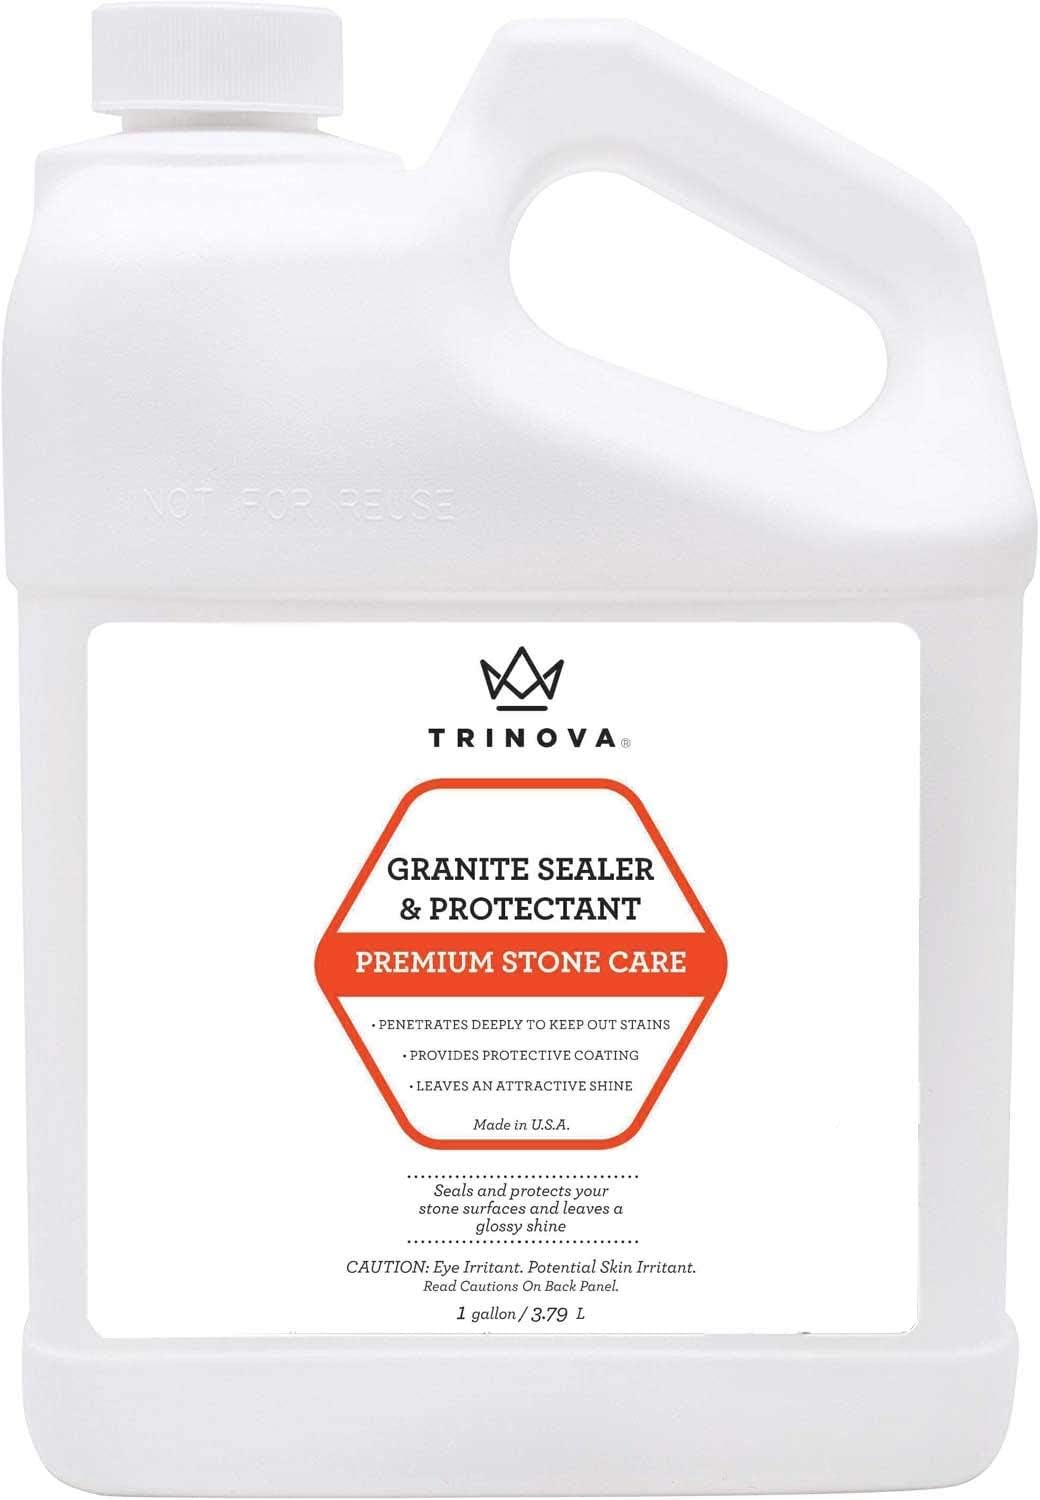 TriNova Granite Sealer & Protector Gallon Refill- Made in USA, Best Stone Polish, Protectant & Care Product - Easy Maintenance for Clean Countertop Surface, Marble, Tile 128 fl oz